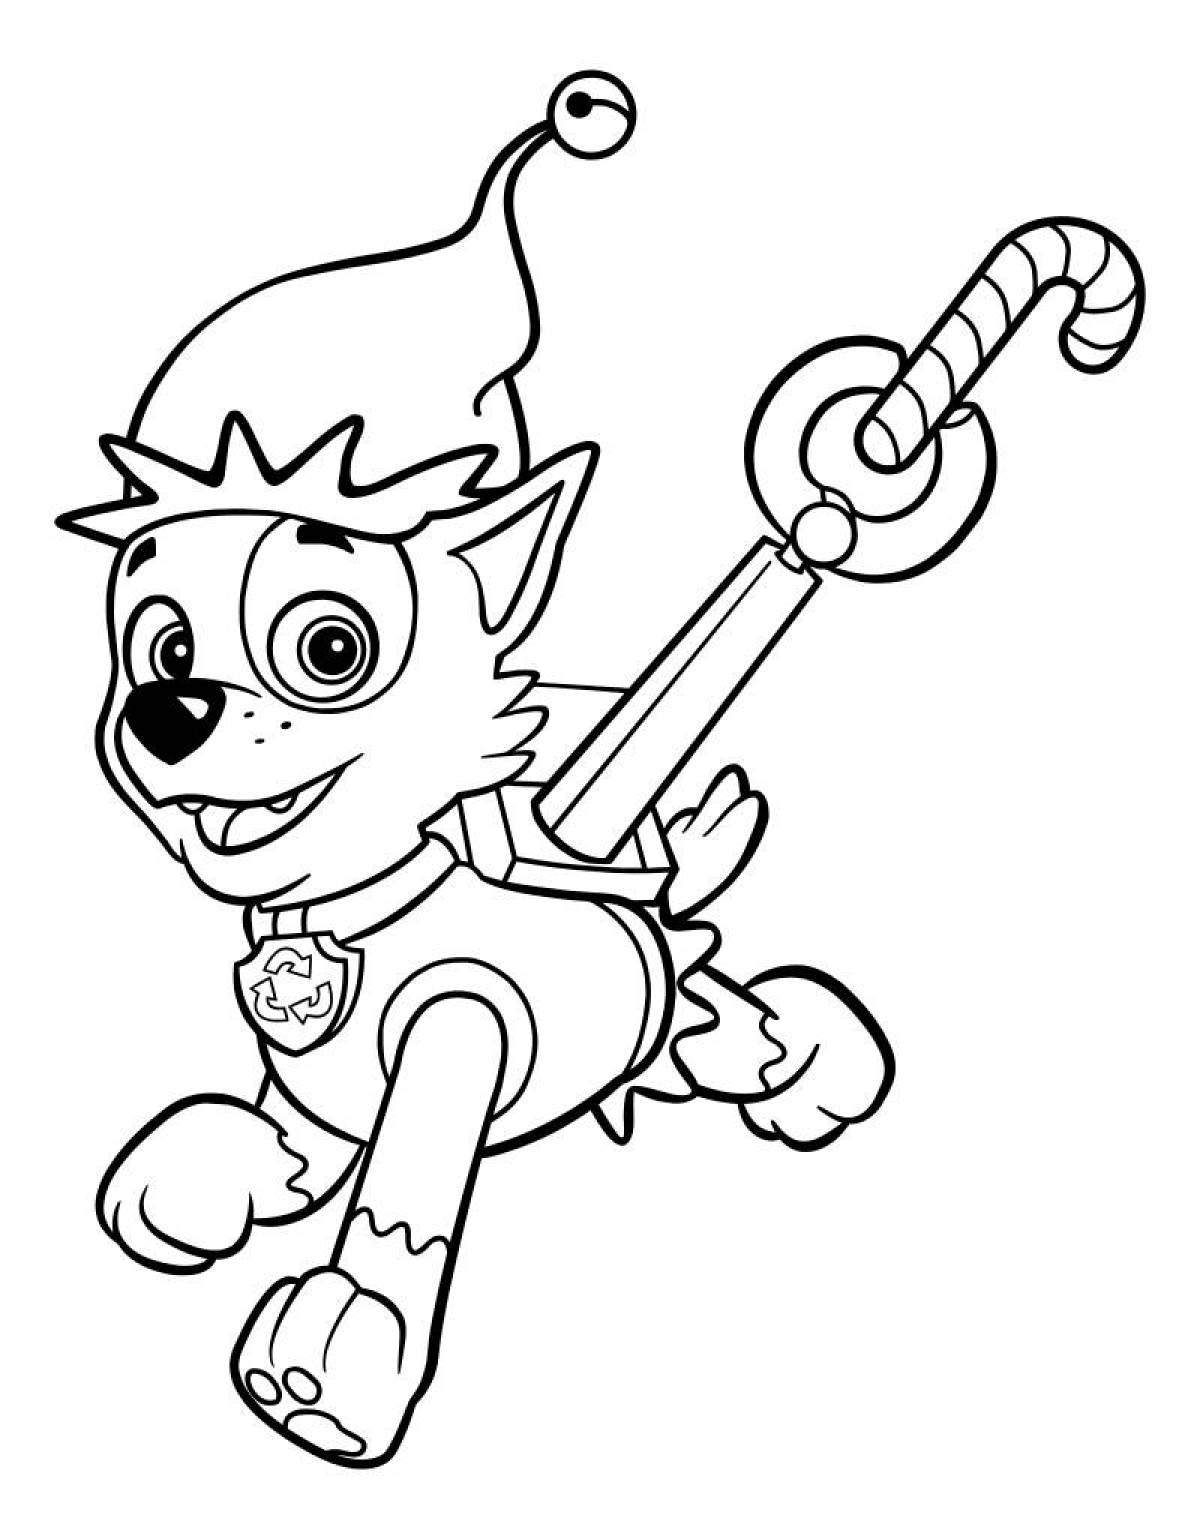 Paw Patrol coloring page new